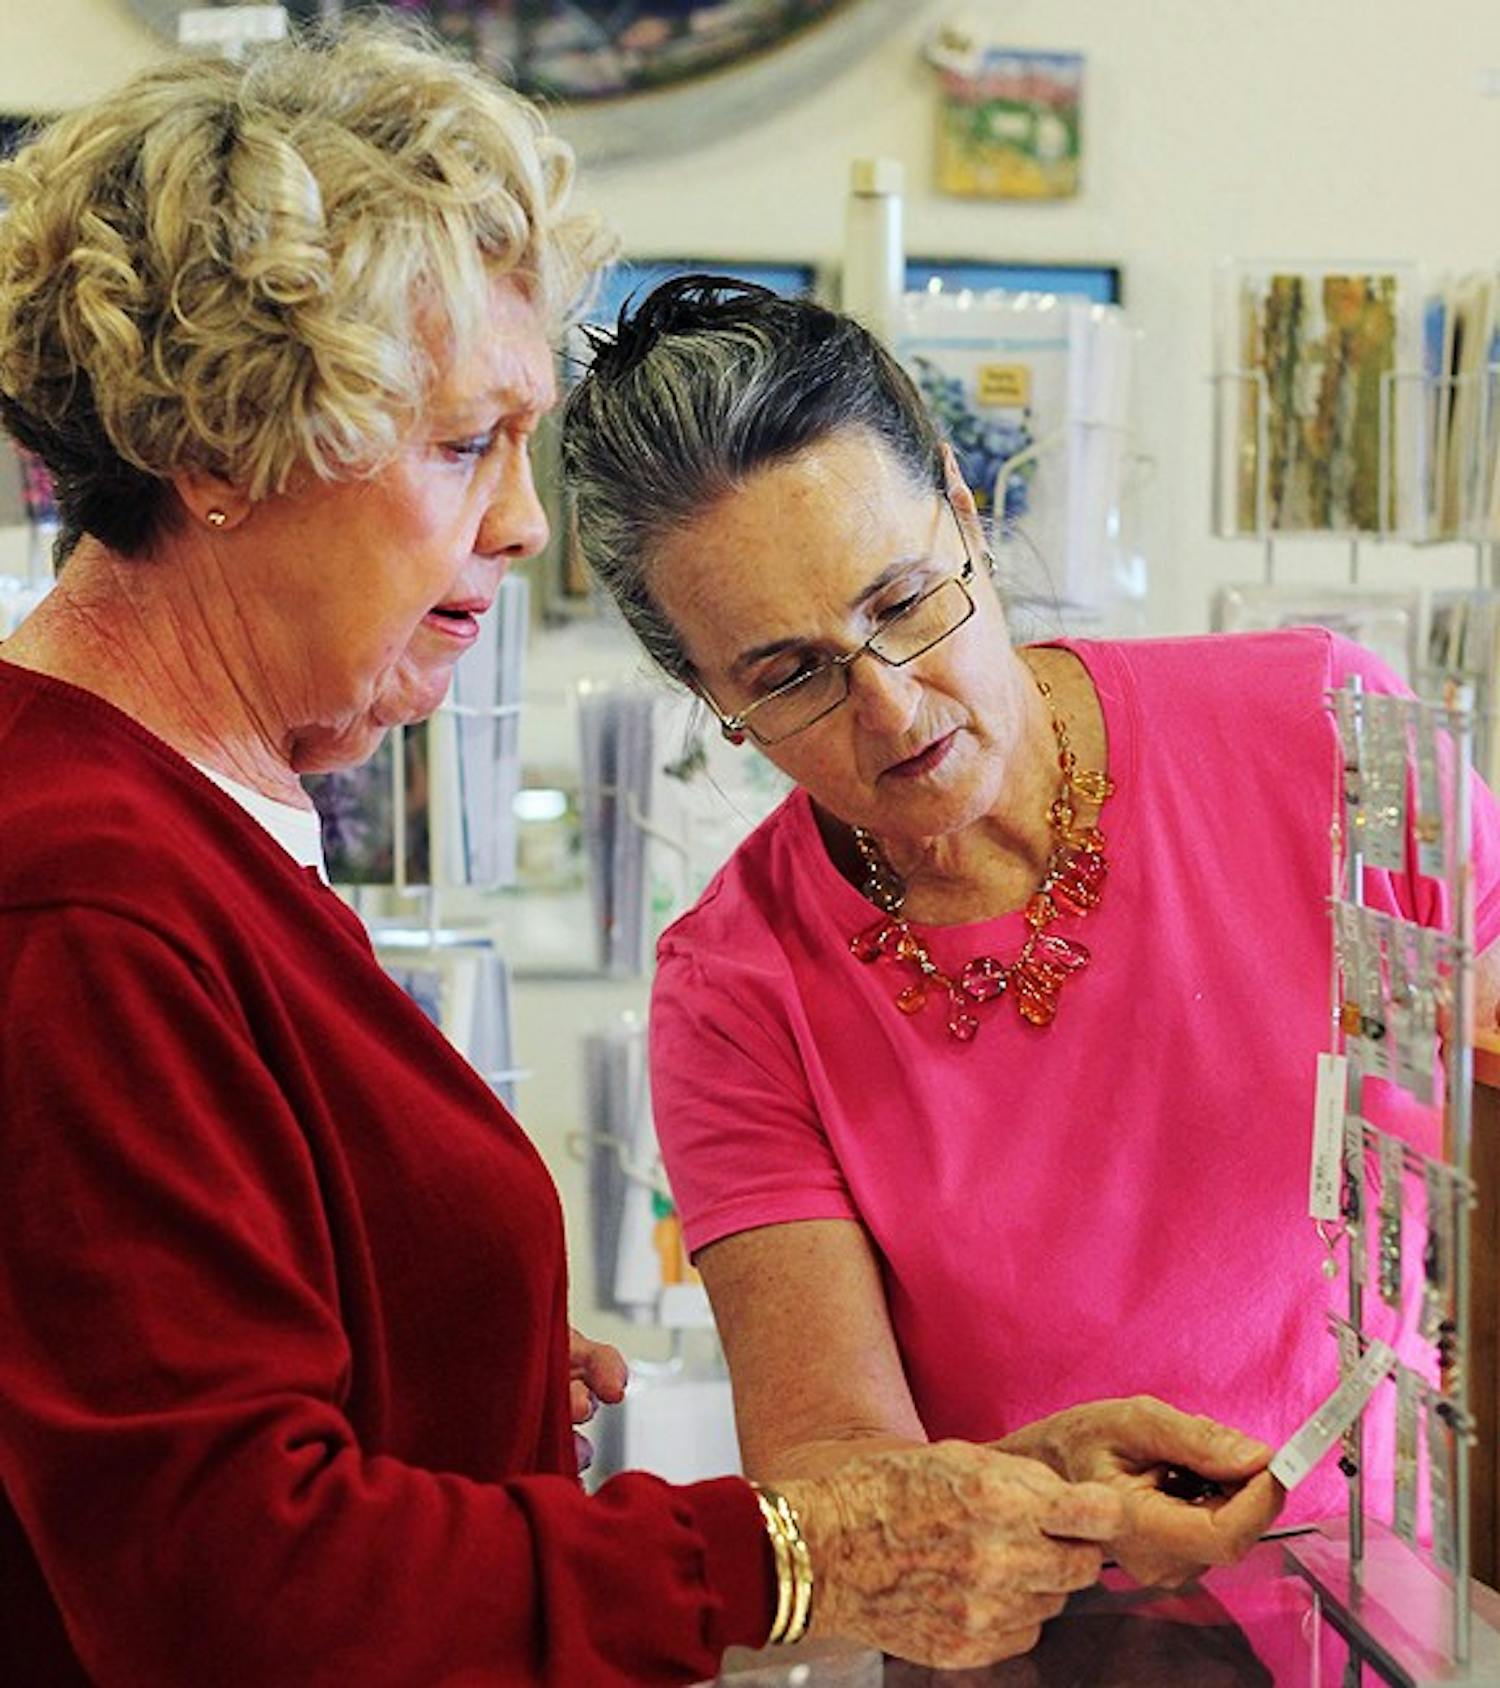 Loyal Womancraft Gifts patron, Edna Webster, (left) and Karen Graves, Display Chair, (right) discuss a jewelry purchase.  Webster loves the atmosphere of the store, the ladies are very helpful and the prices are reasonable.  Graves has been working at Womancraft Gifts since 1976 and loves the work environment said it was great way to learn and share with other artists.                                                                                                                                                                                                  